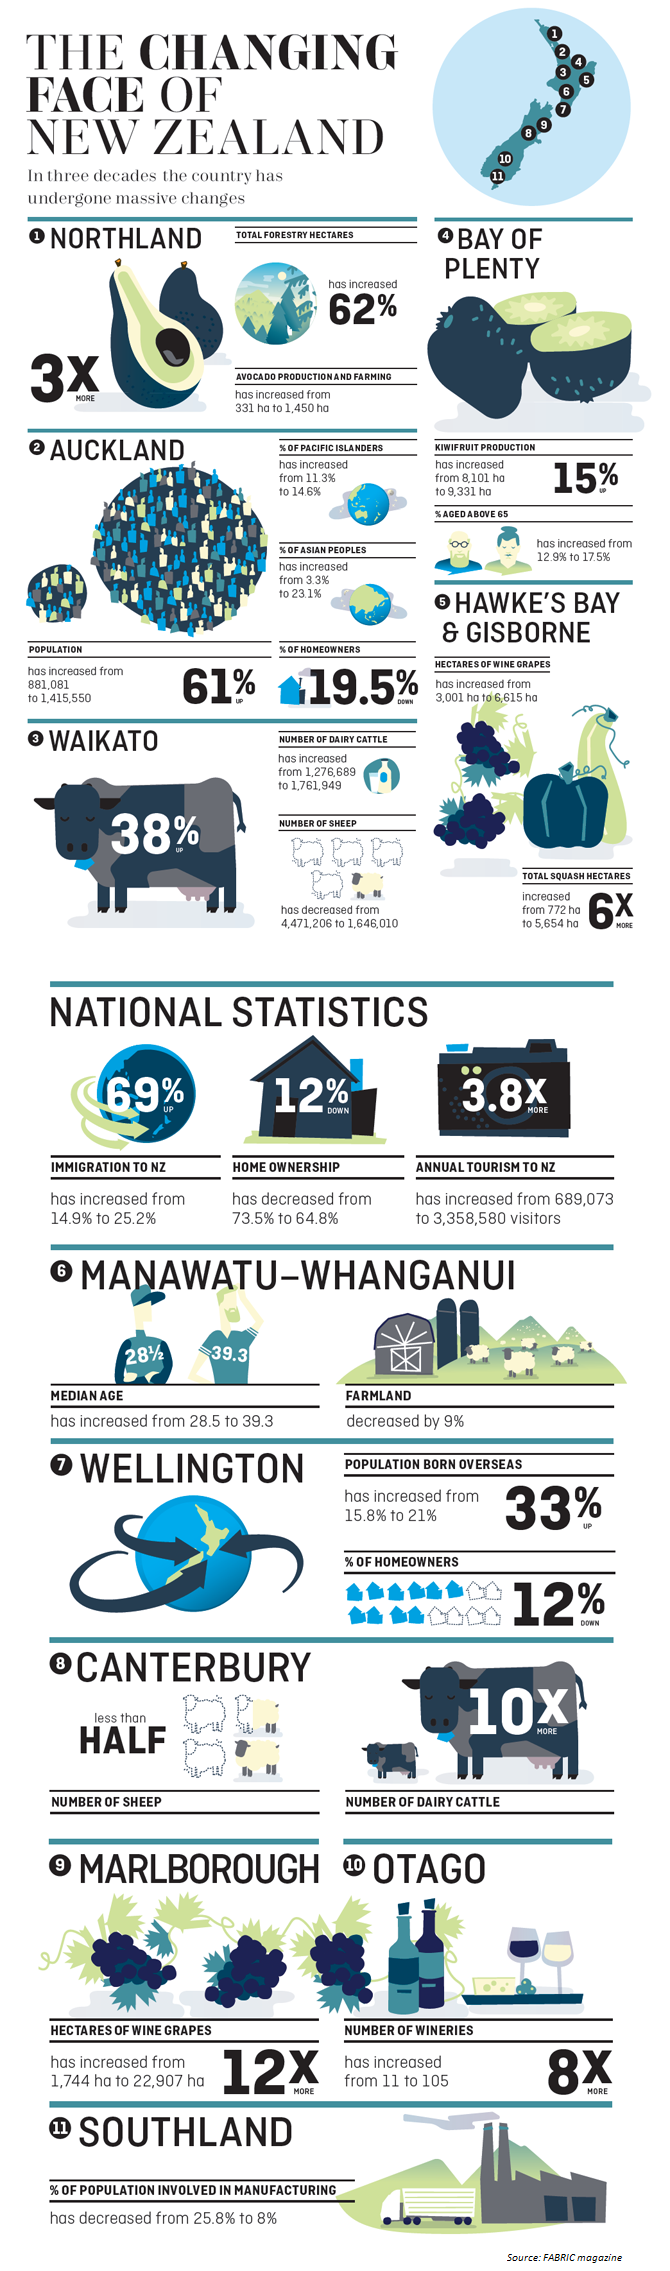 The changing face of NZ infog